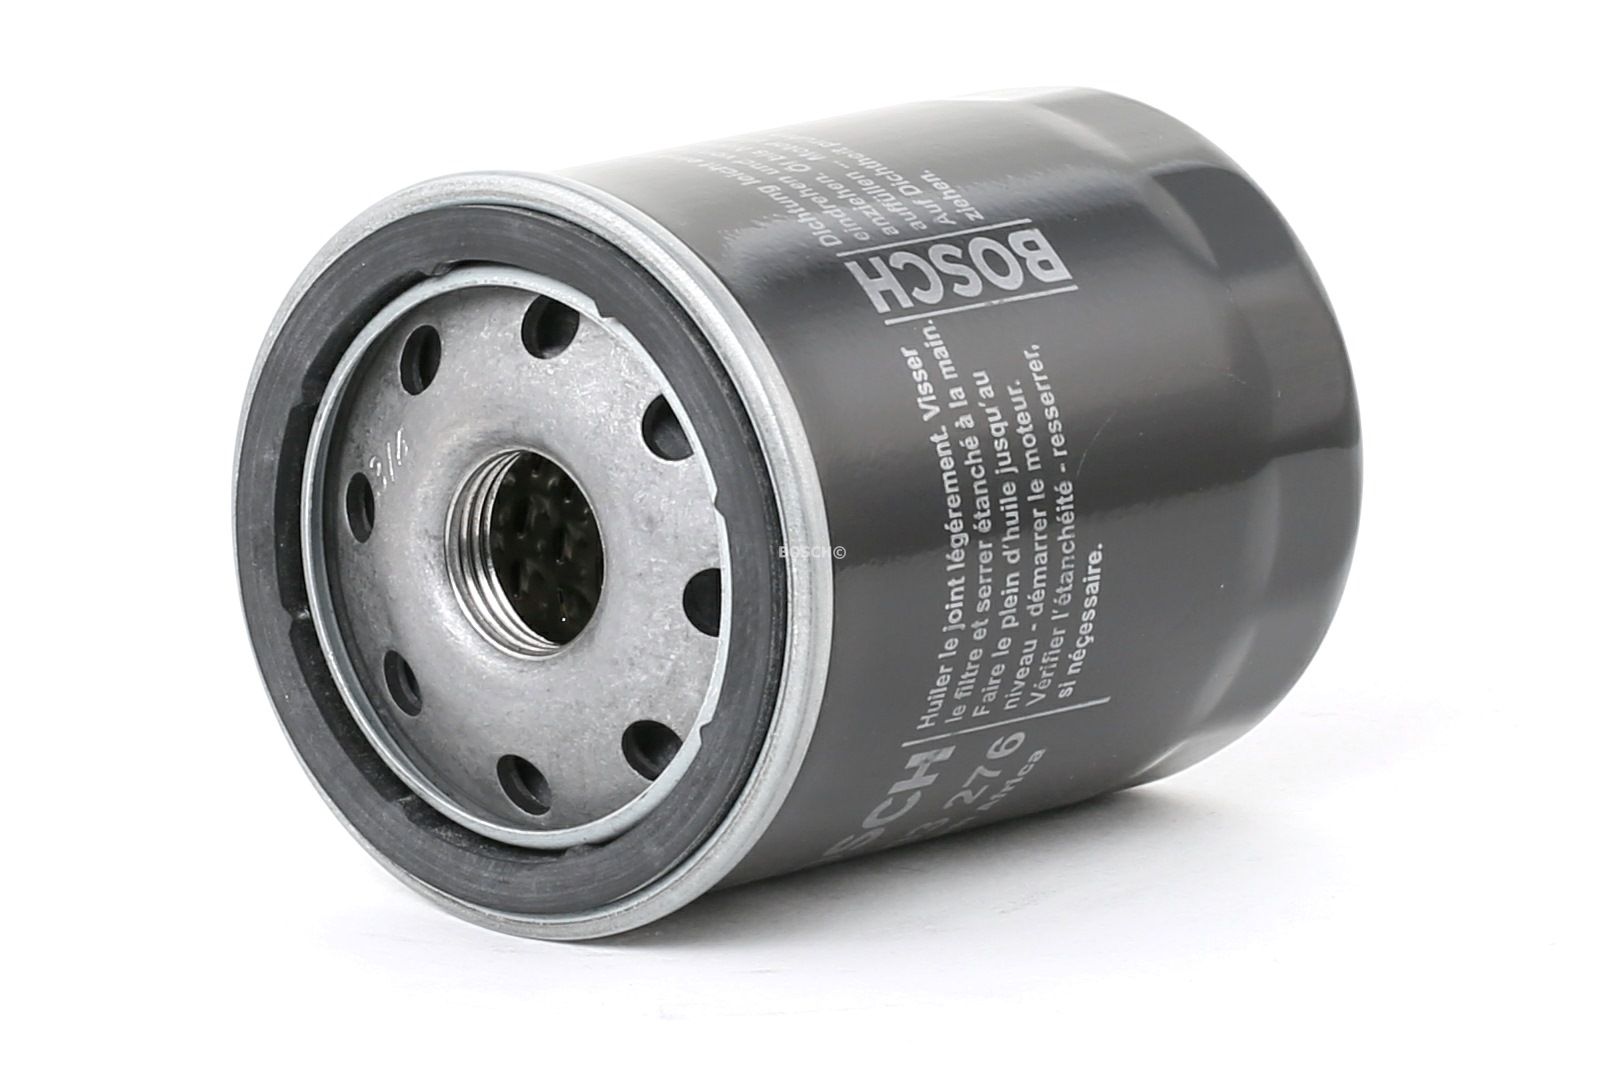 Fiat Oil filter BOSCH P 3276 at a good price